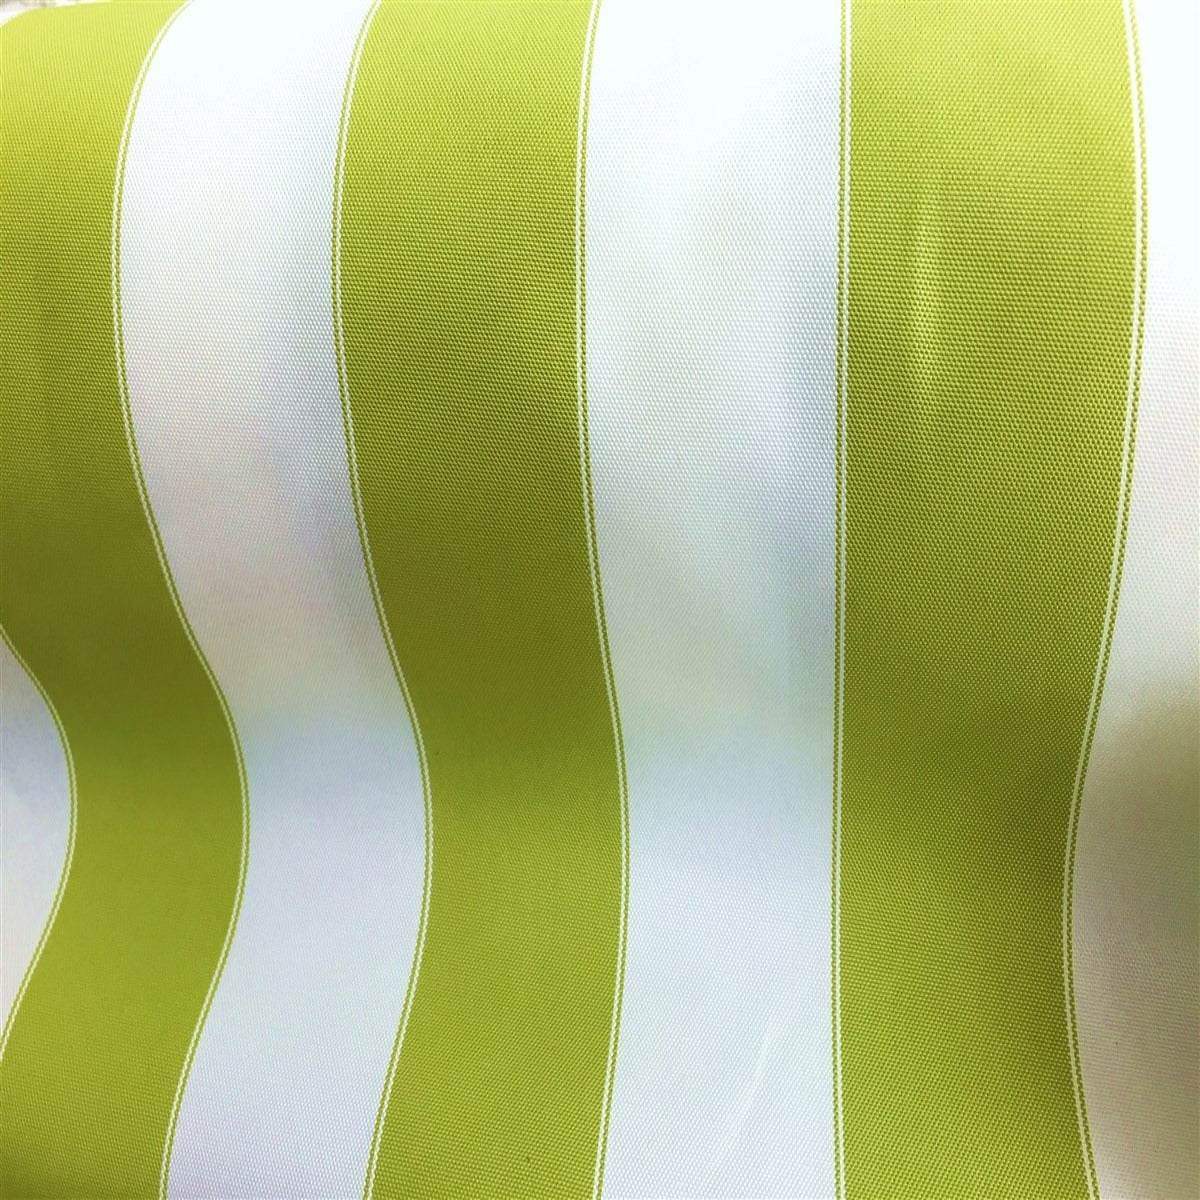 Lime Green White Striped Outdoor Canvas Fabric - Fashion Fabrics Los Angeles 